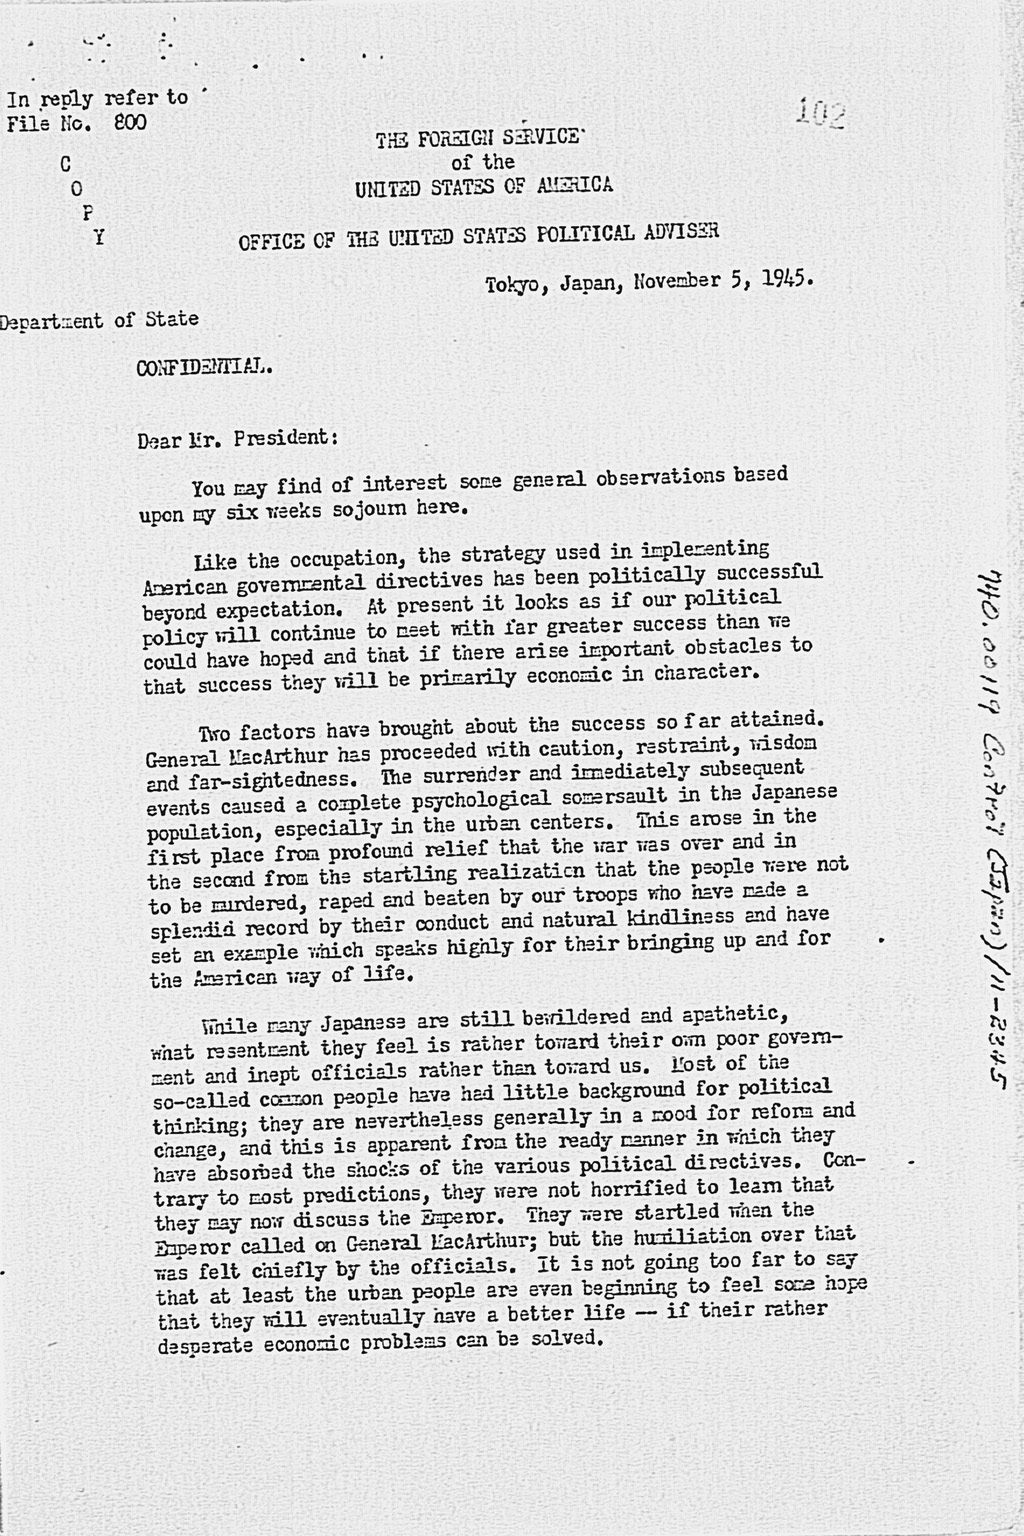 『Letter from George Atcheson, Jr. to the President dated November 5, 1945.』(拡大画像)